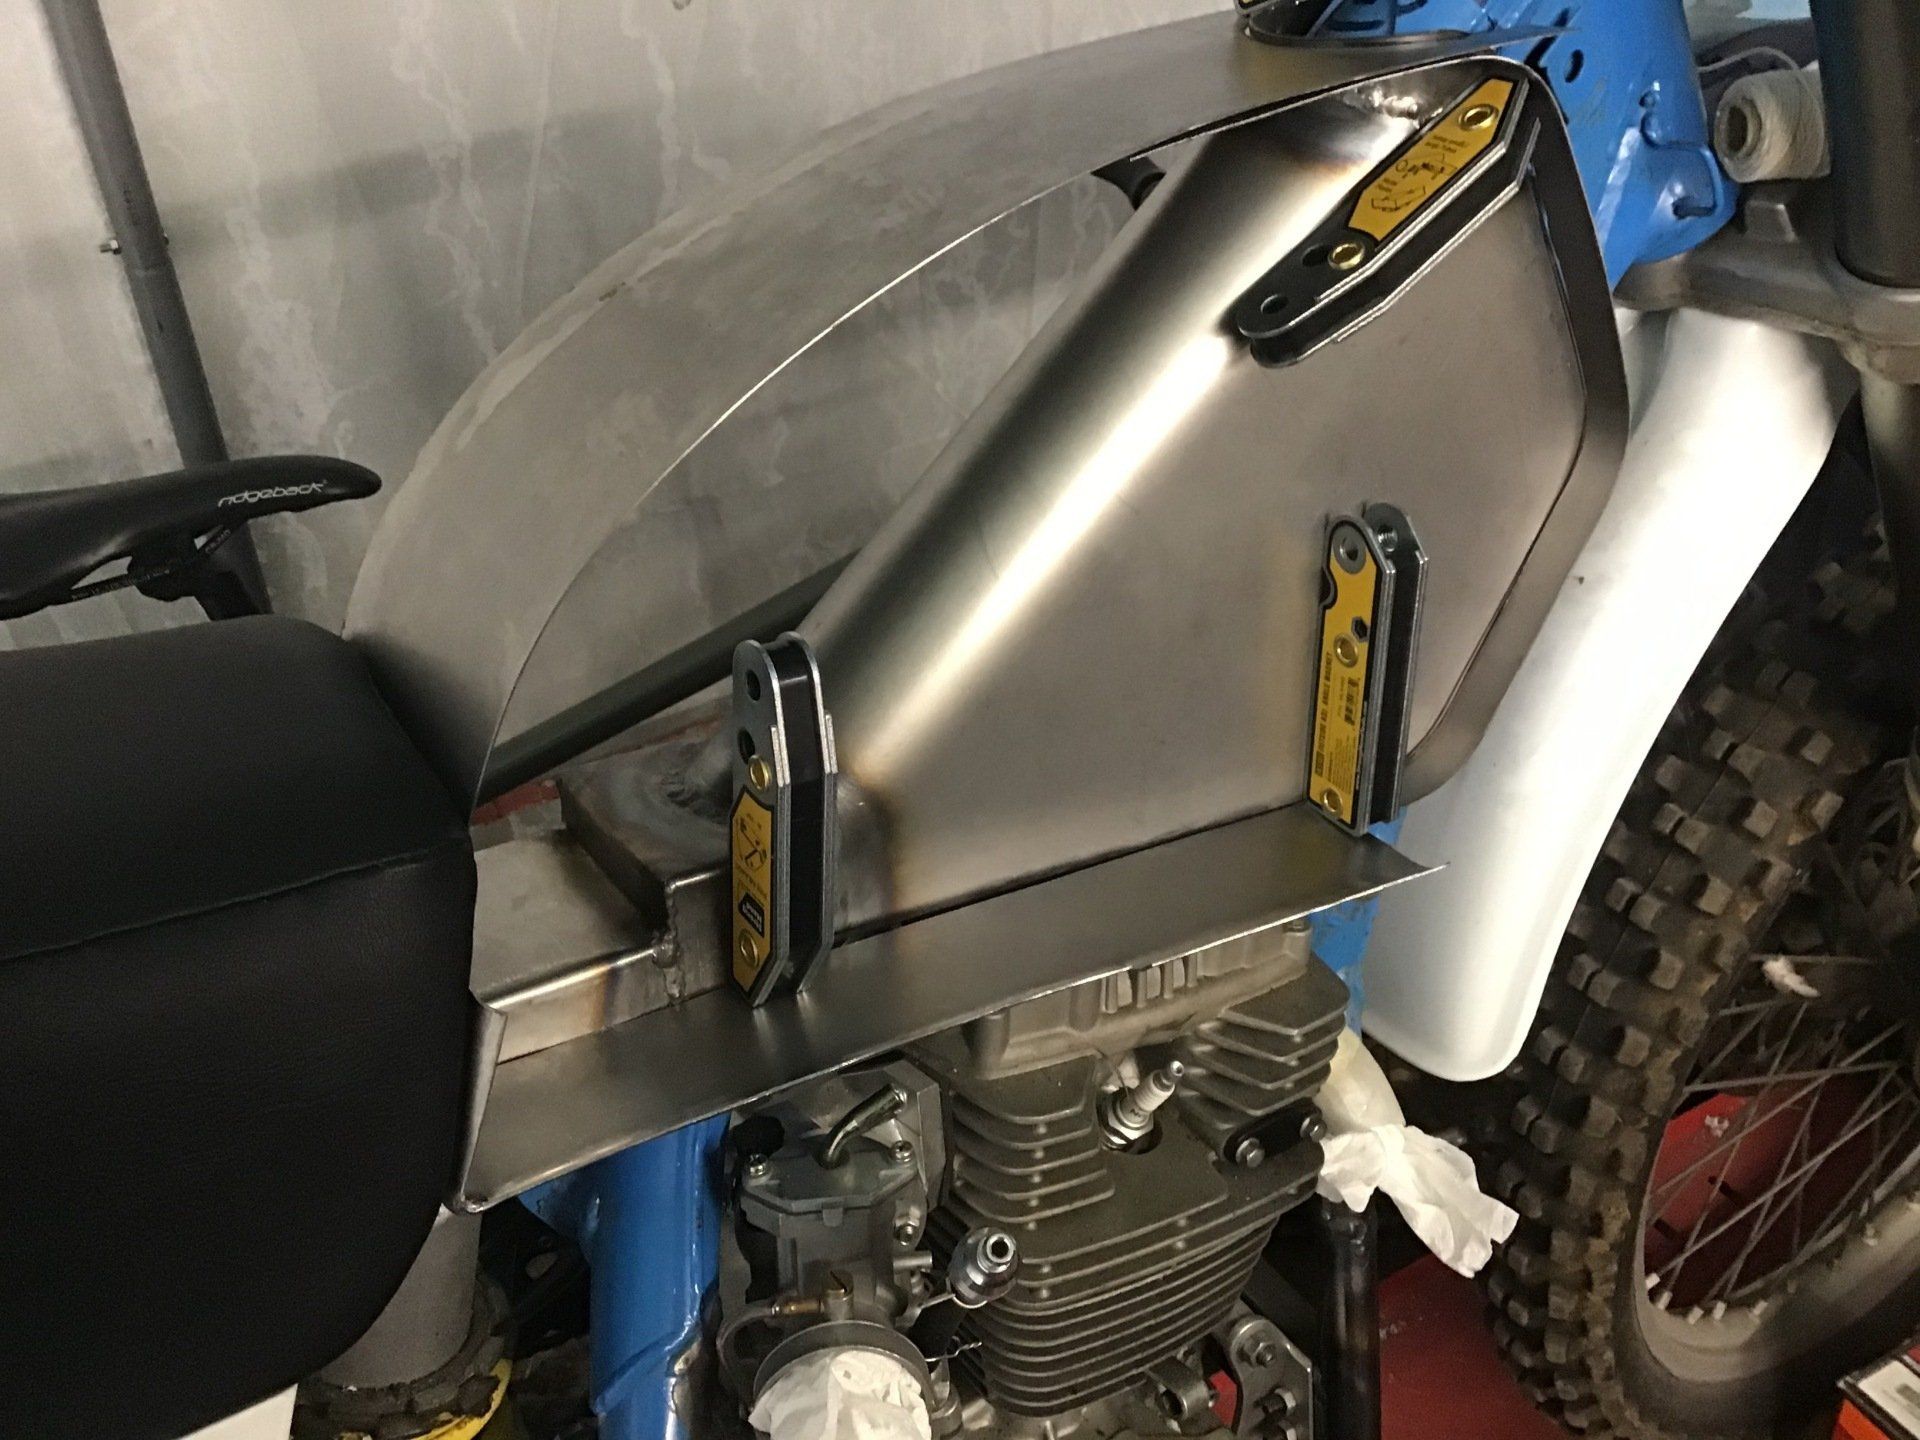 Building motorcycle fuel tank from scratch